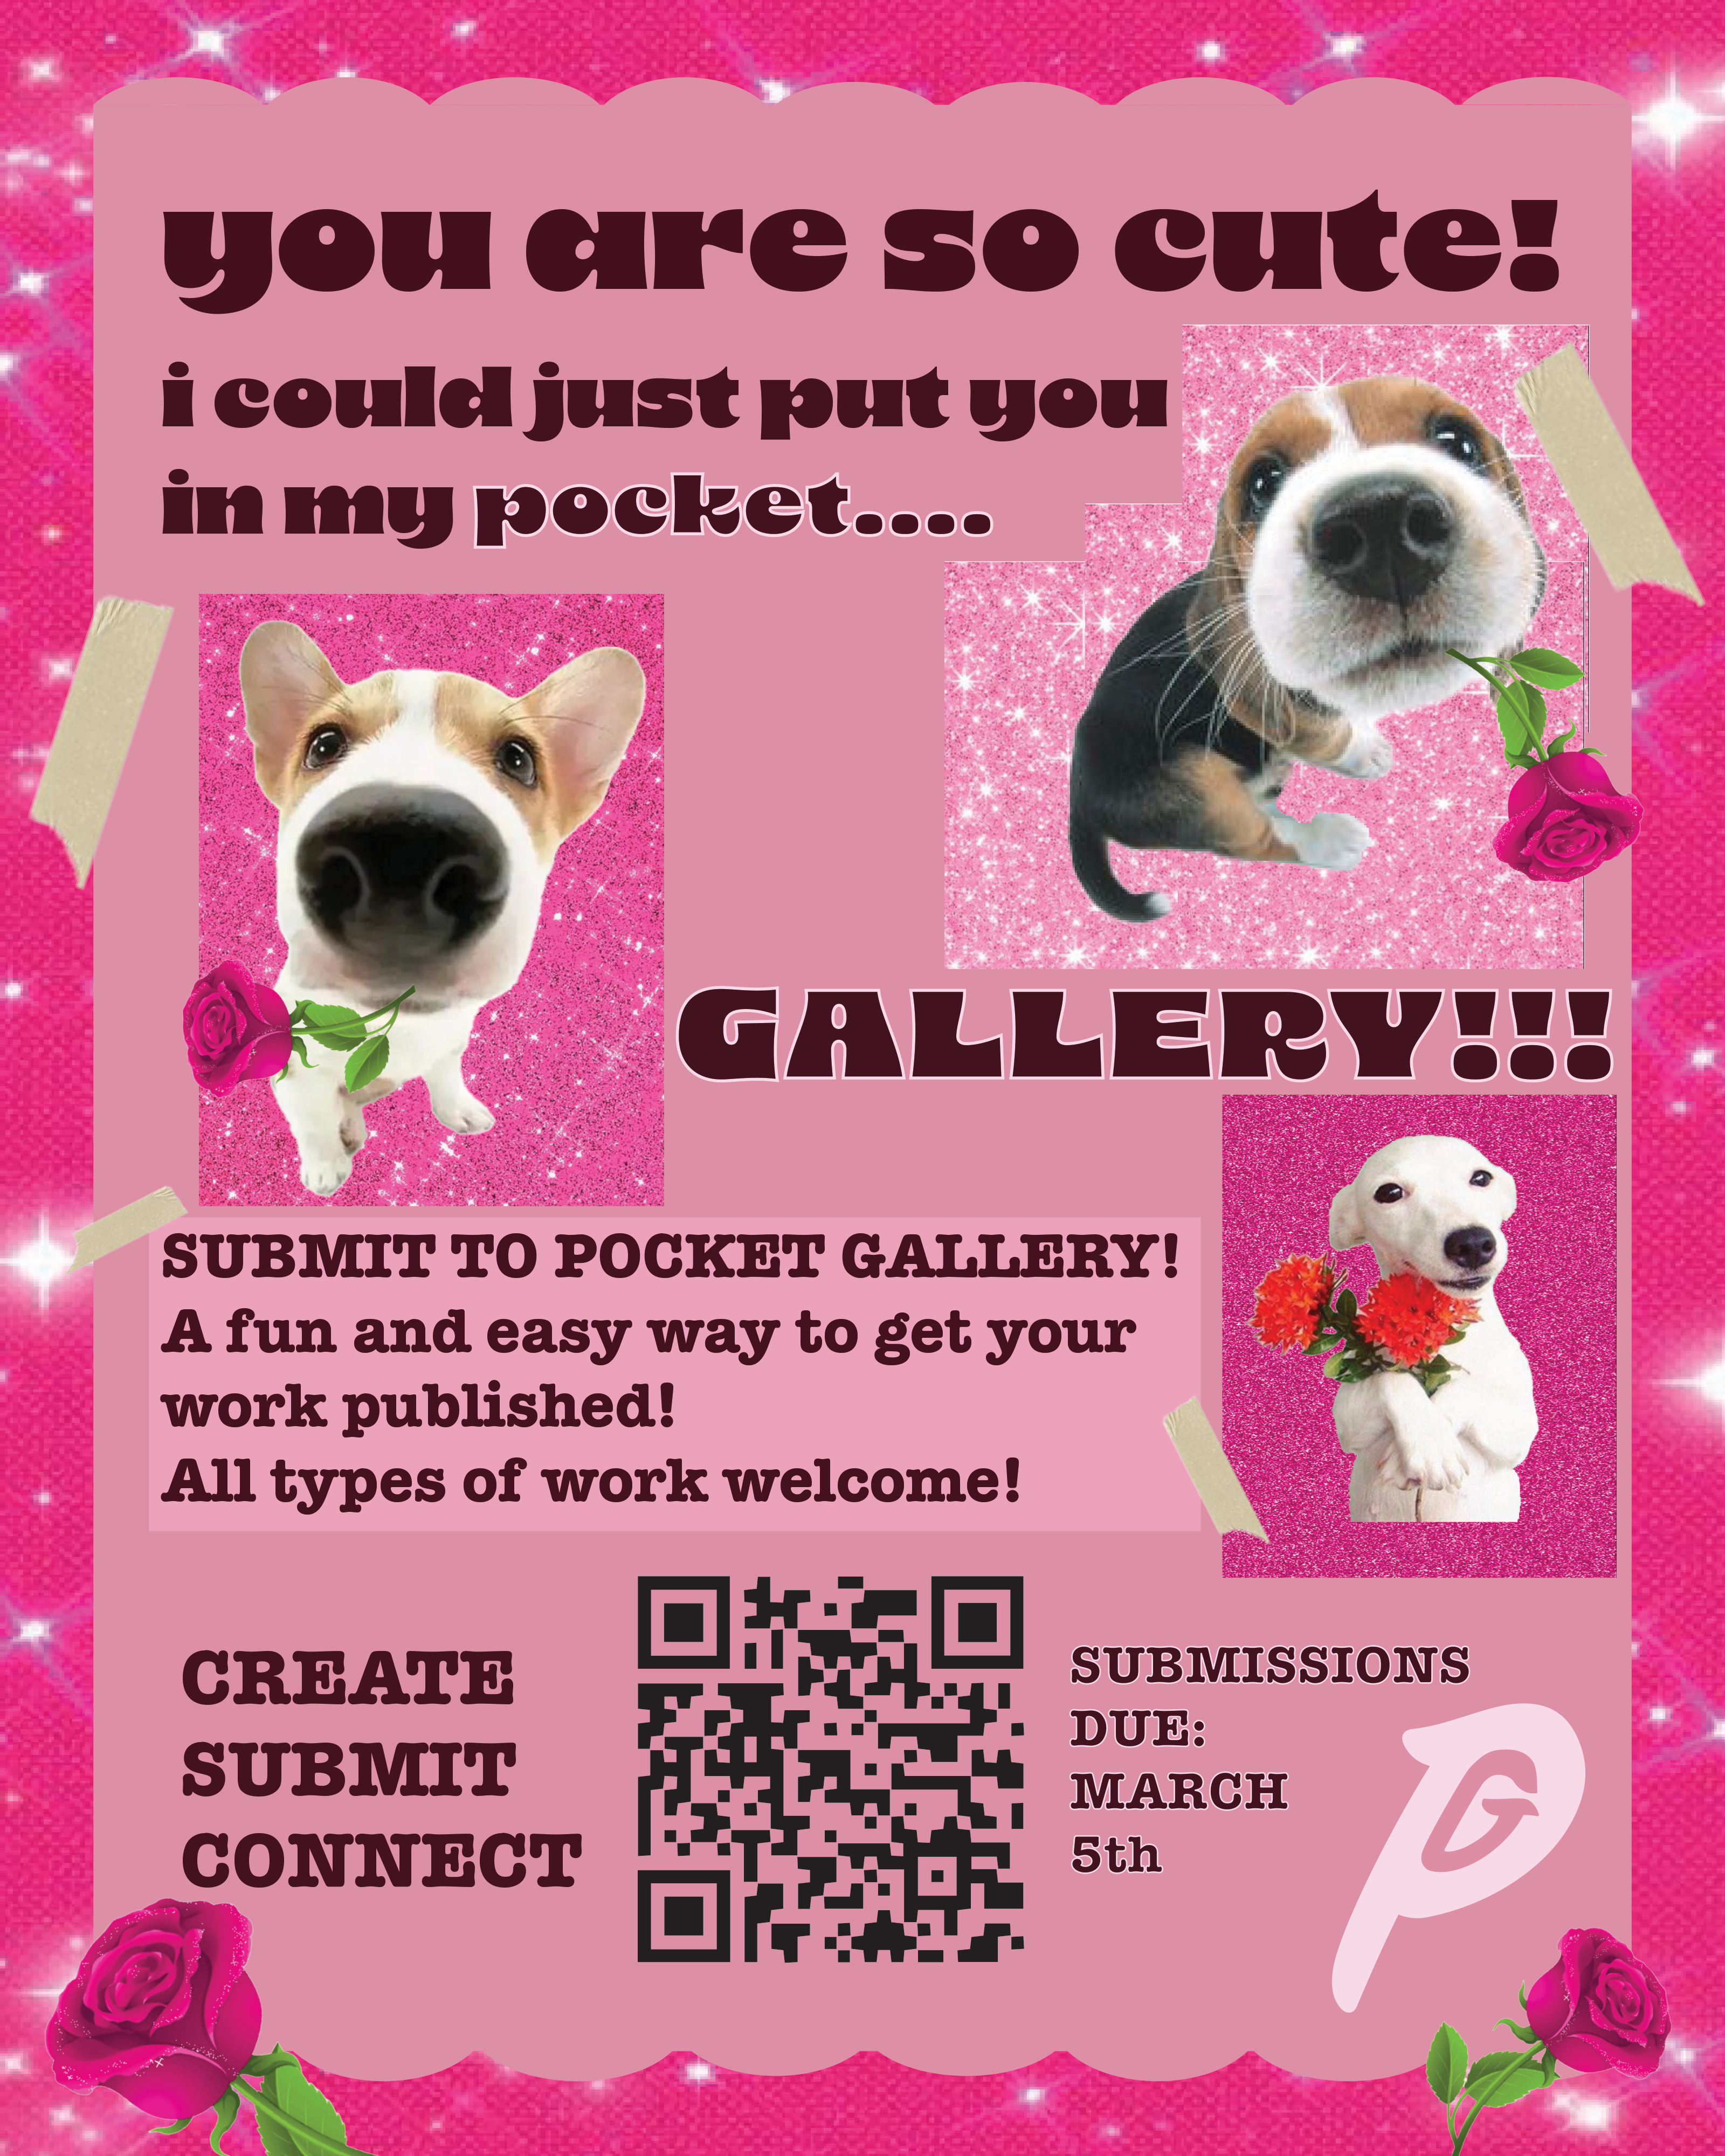 Submit to Pocket Gallery